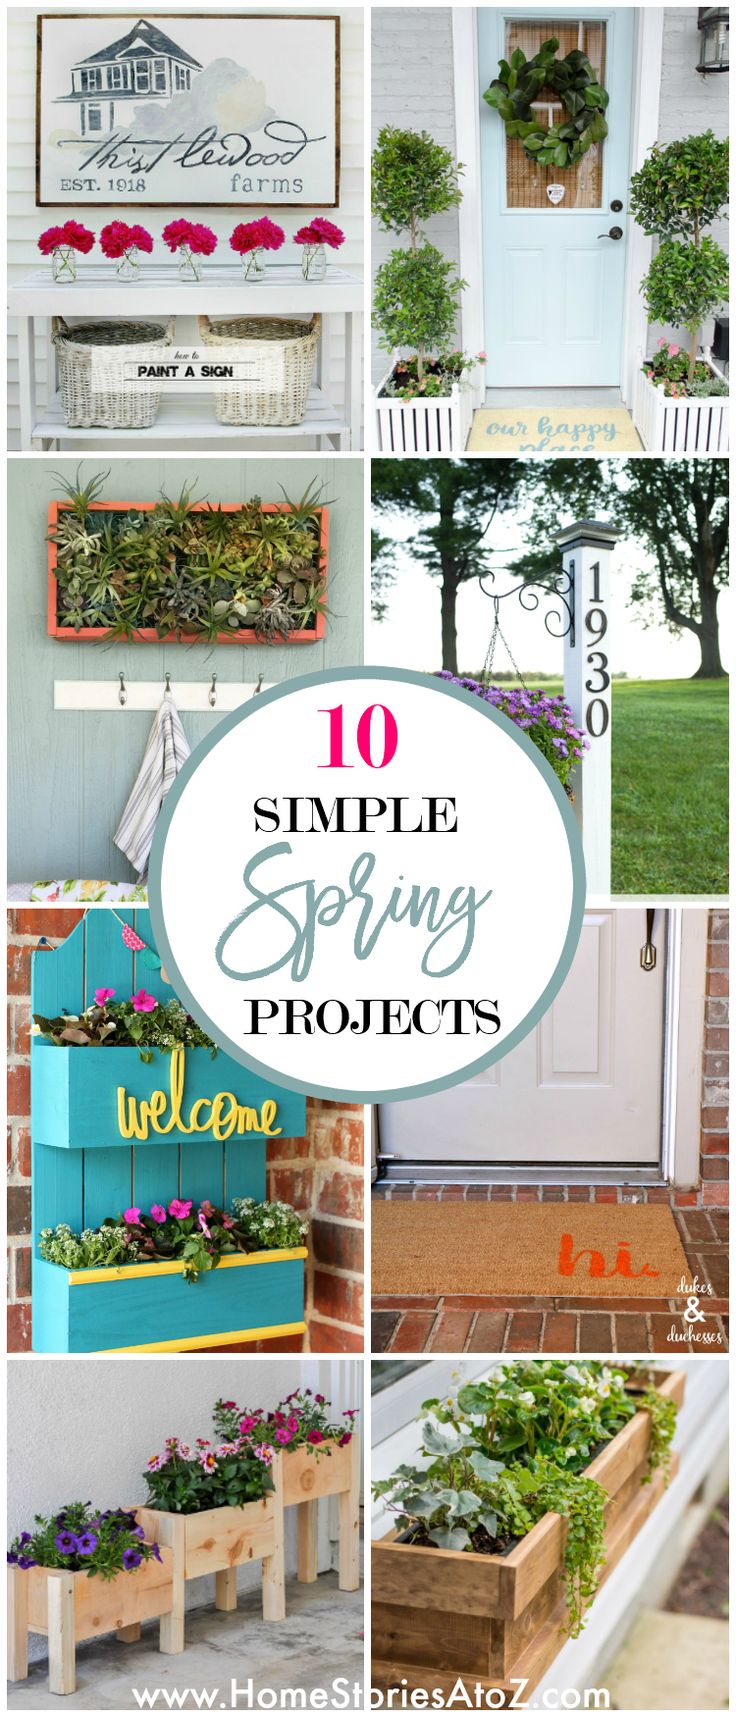 Simple Ideas for Spring - Home Stories A to Z